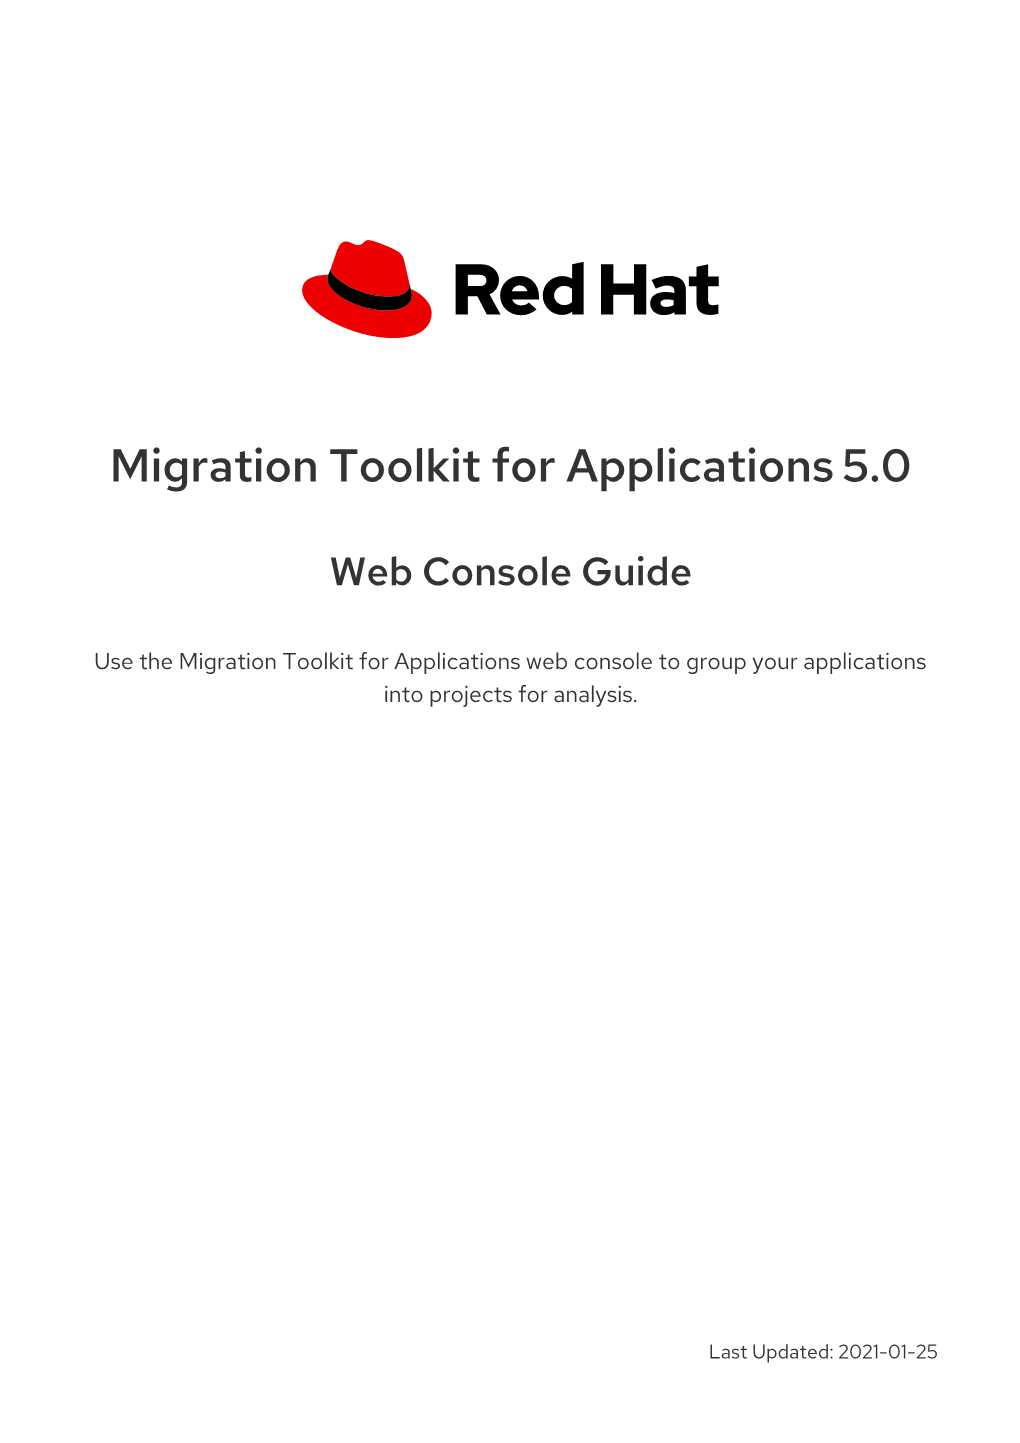 Migration Toolkit for Applications 5.0 Web Console Guide